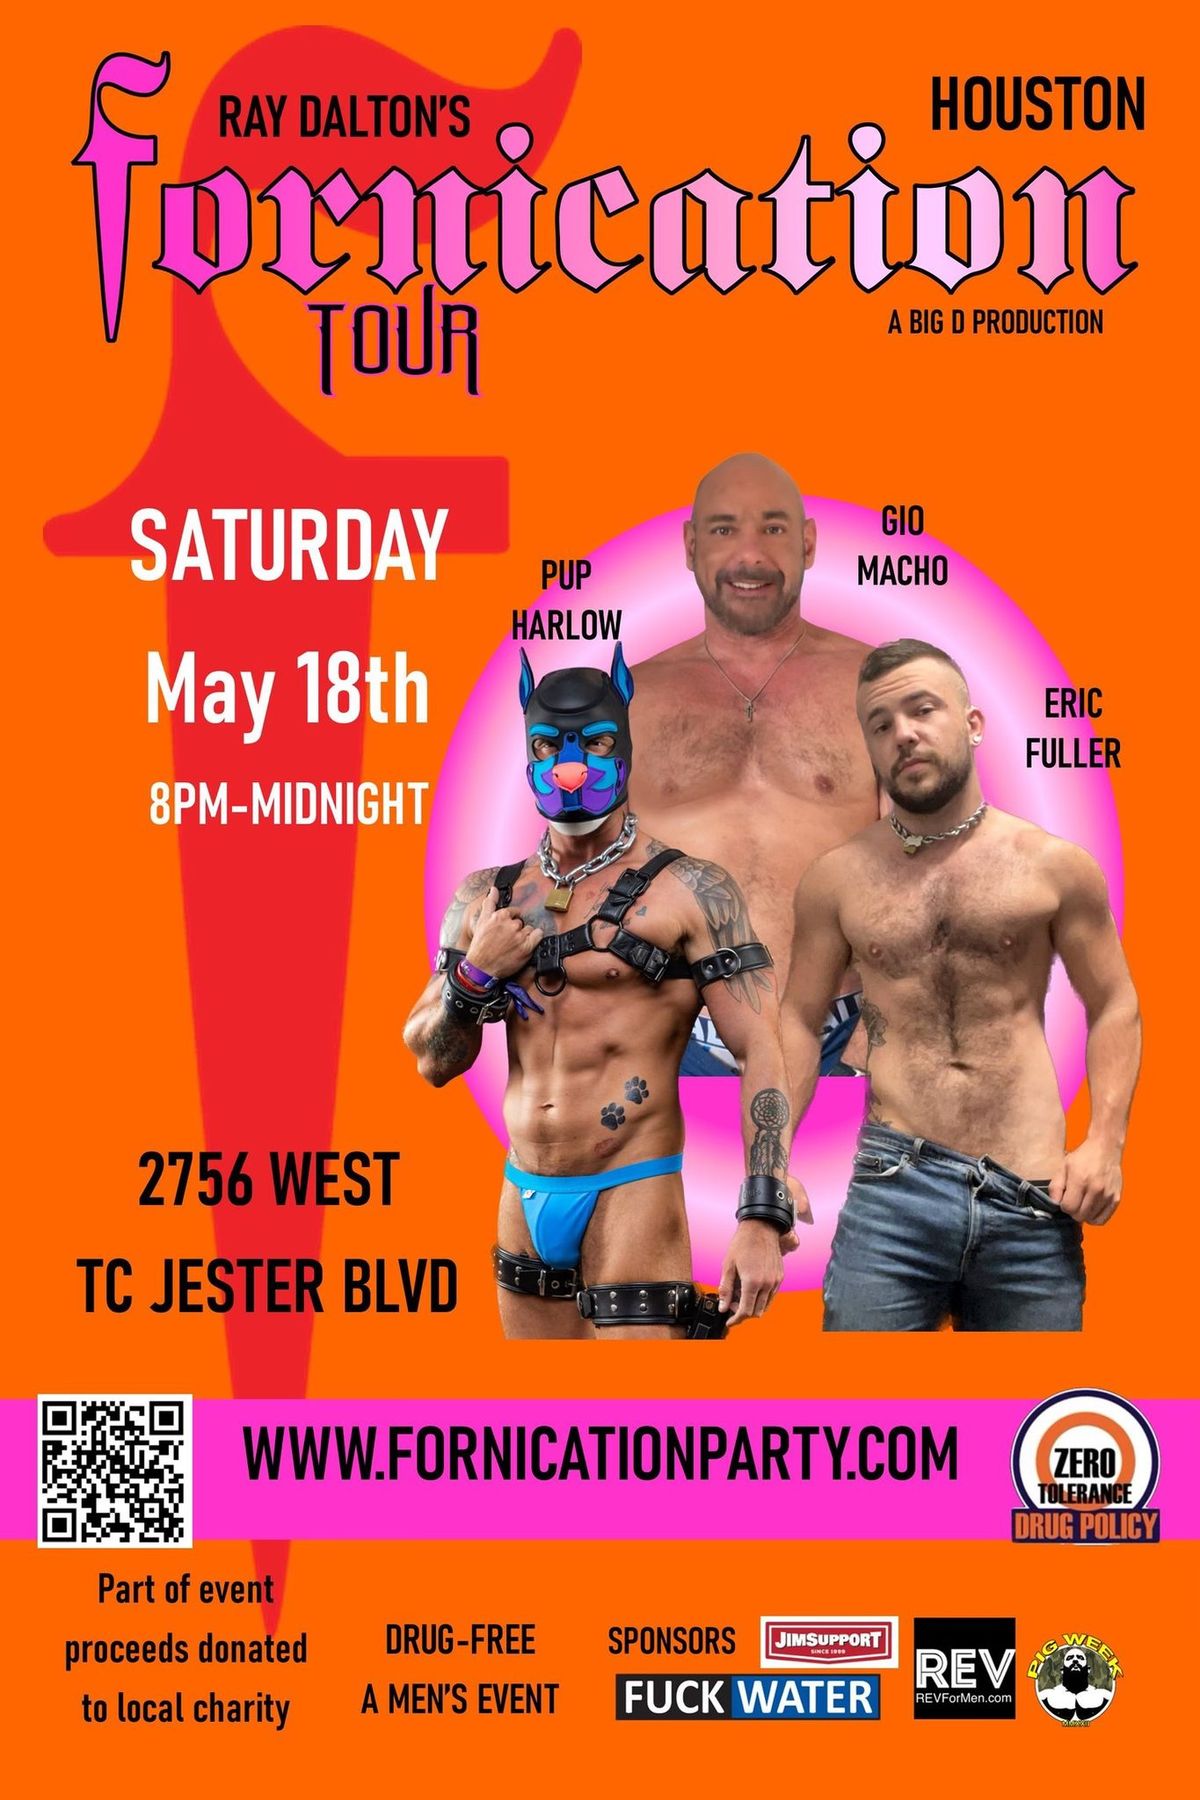 Fornication Party Houston